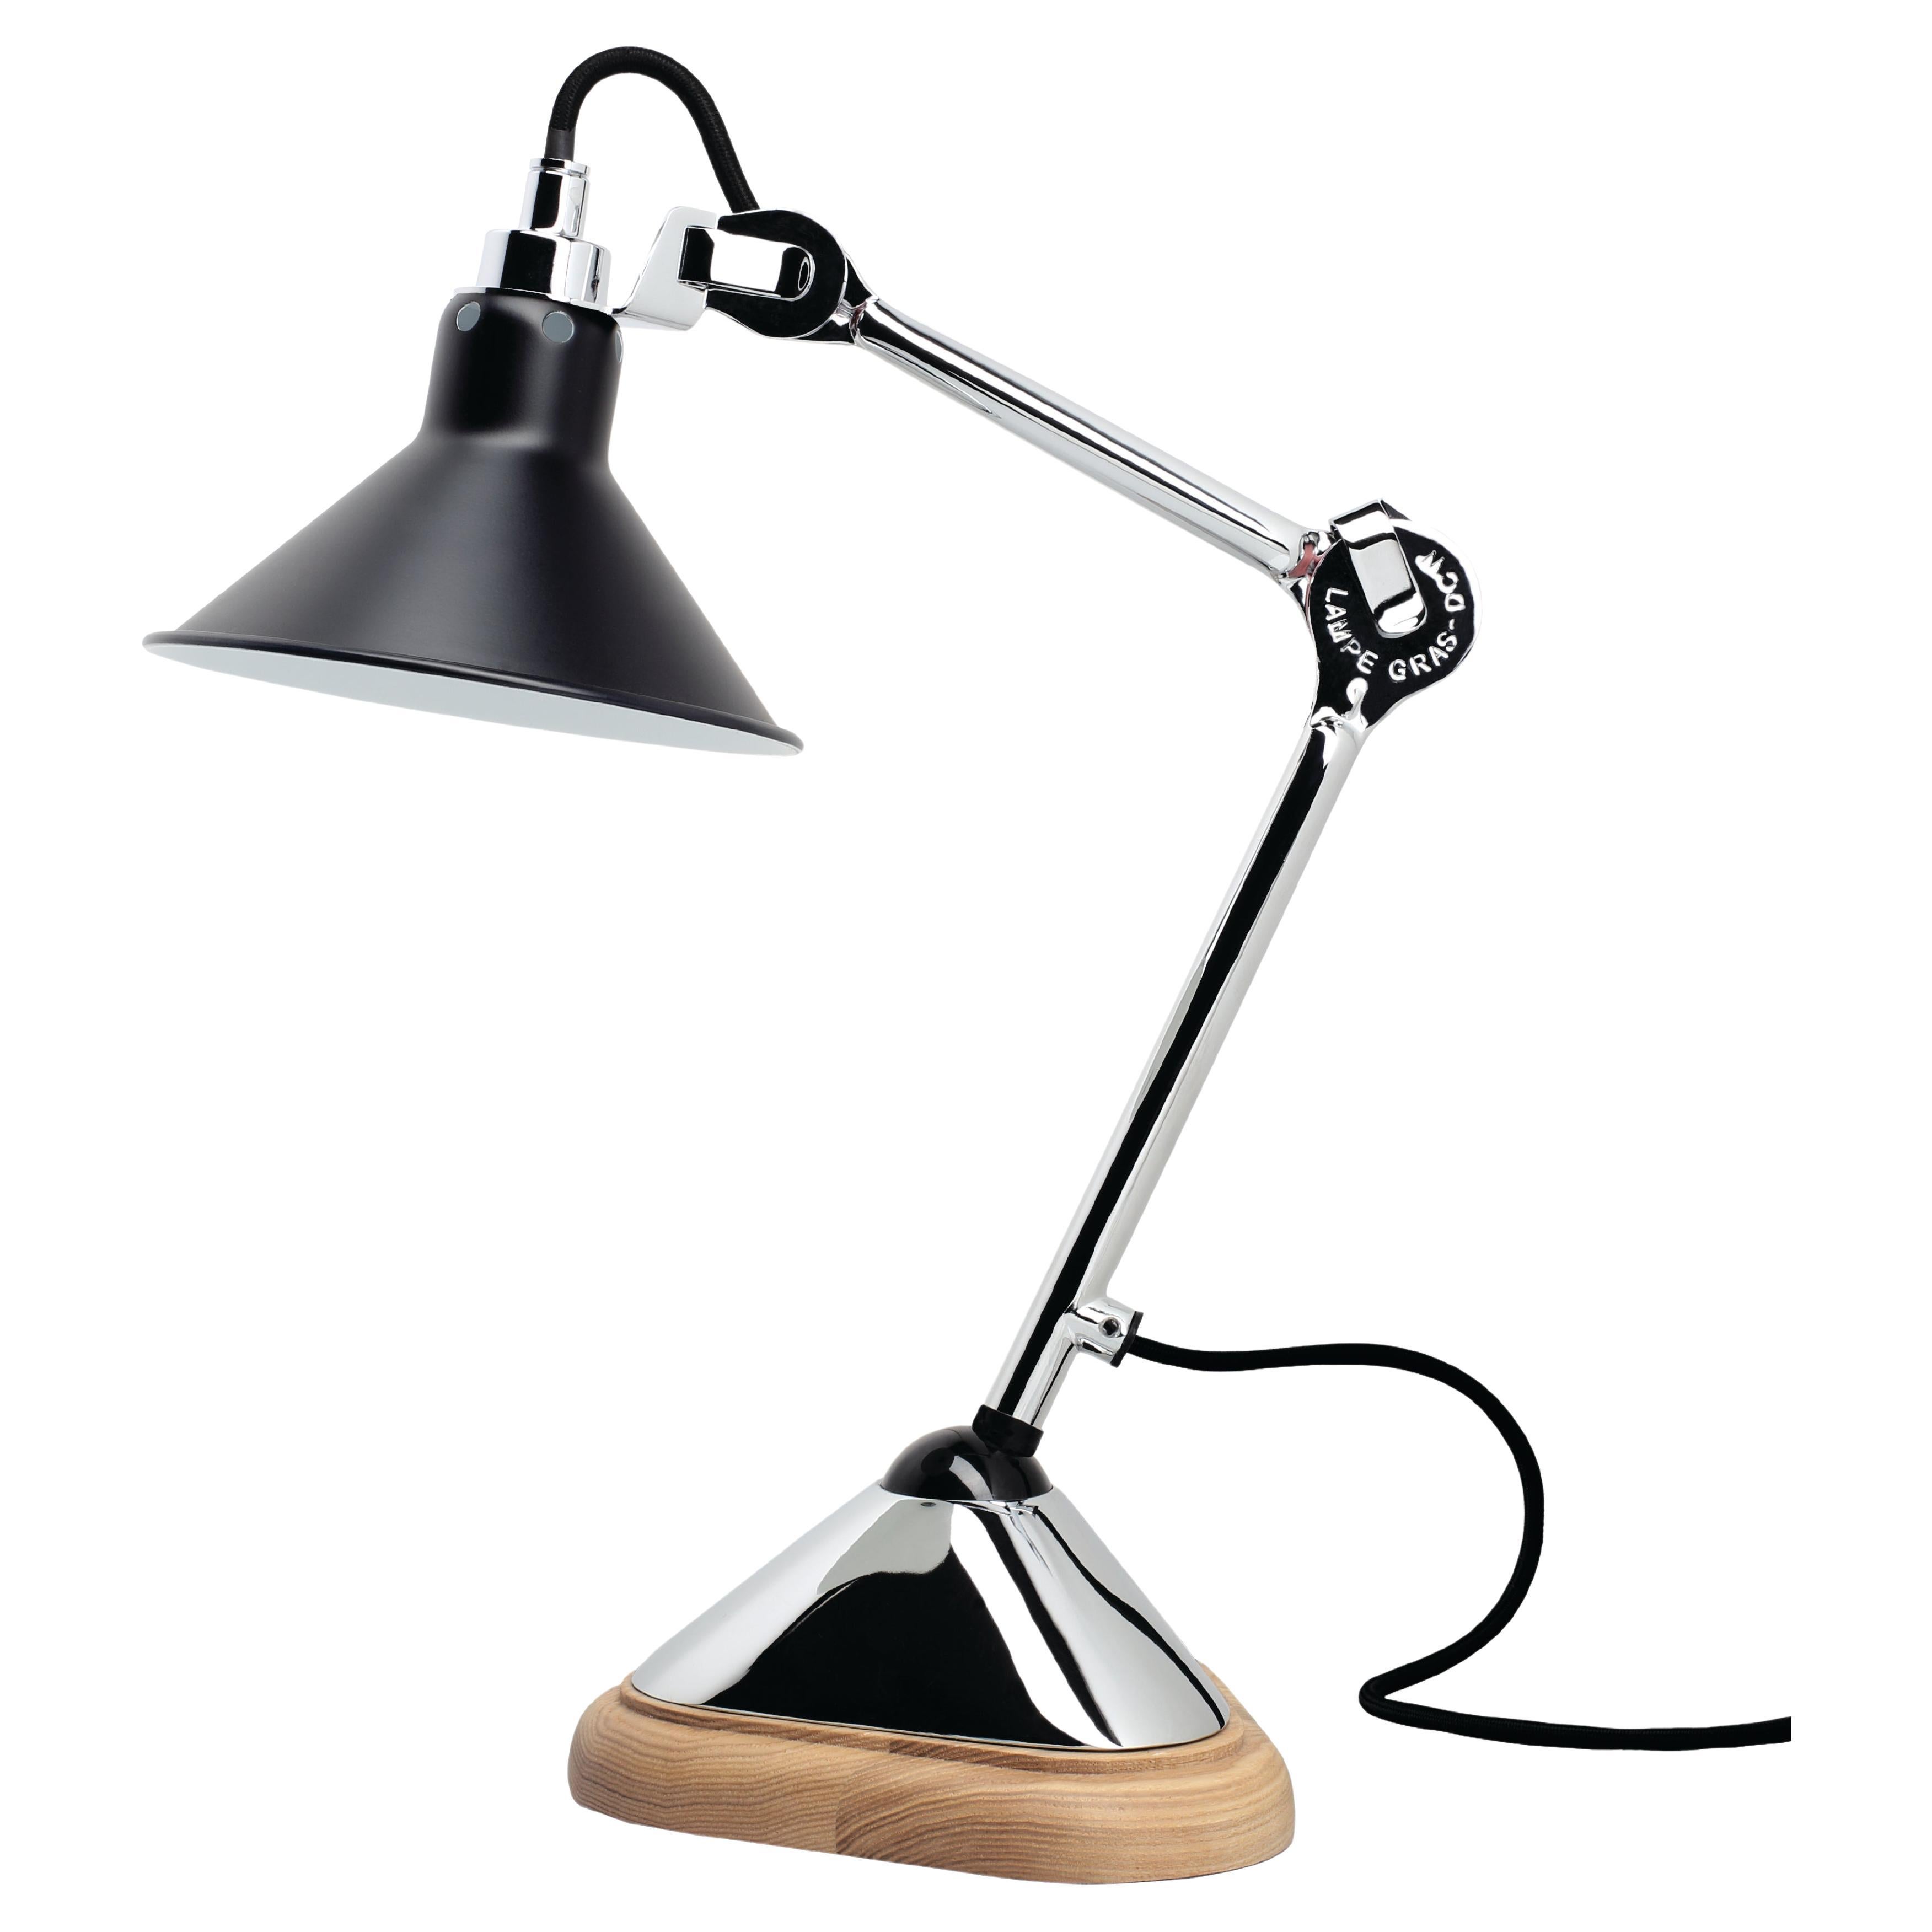 DCW Editions La Lampe Gras N°207 Conic Table Lamp in Chrome Arm with Black Shade